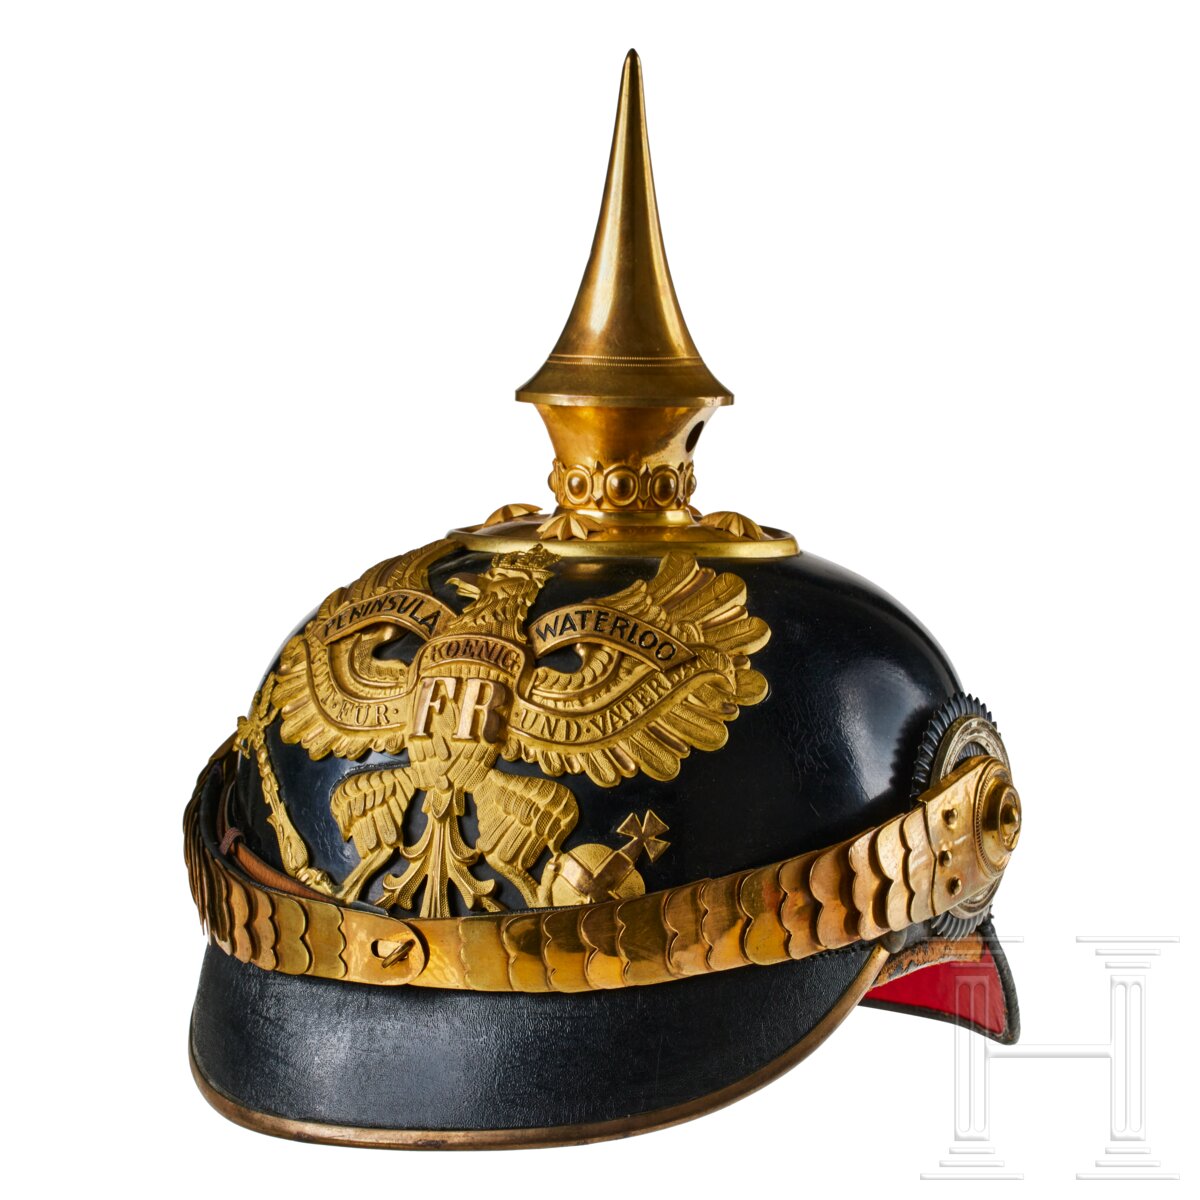 A helmet for Prussian IR 73 Officers